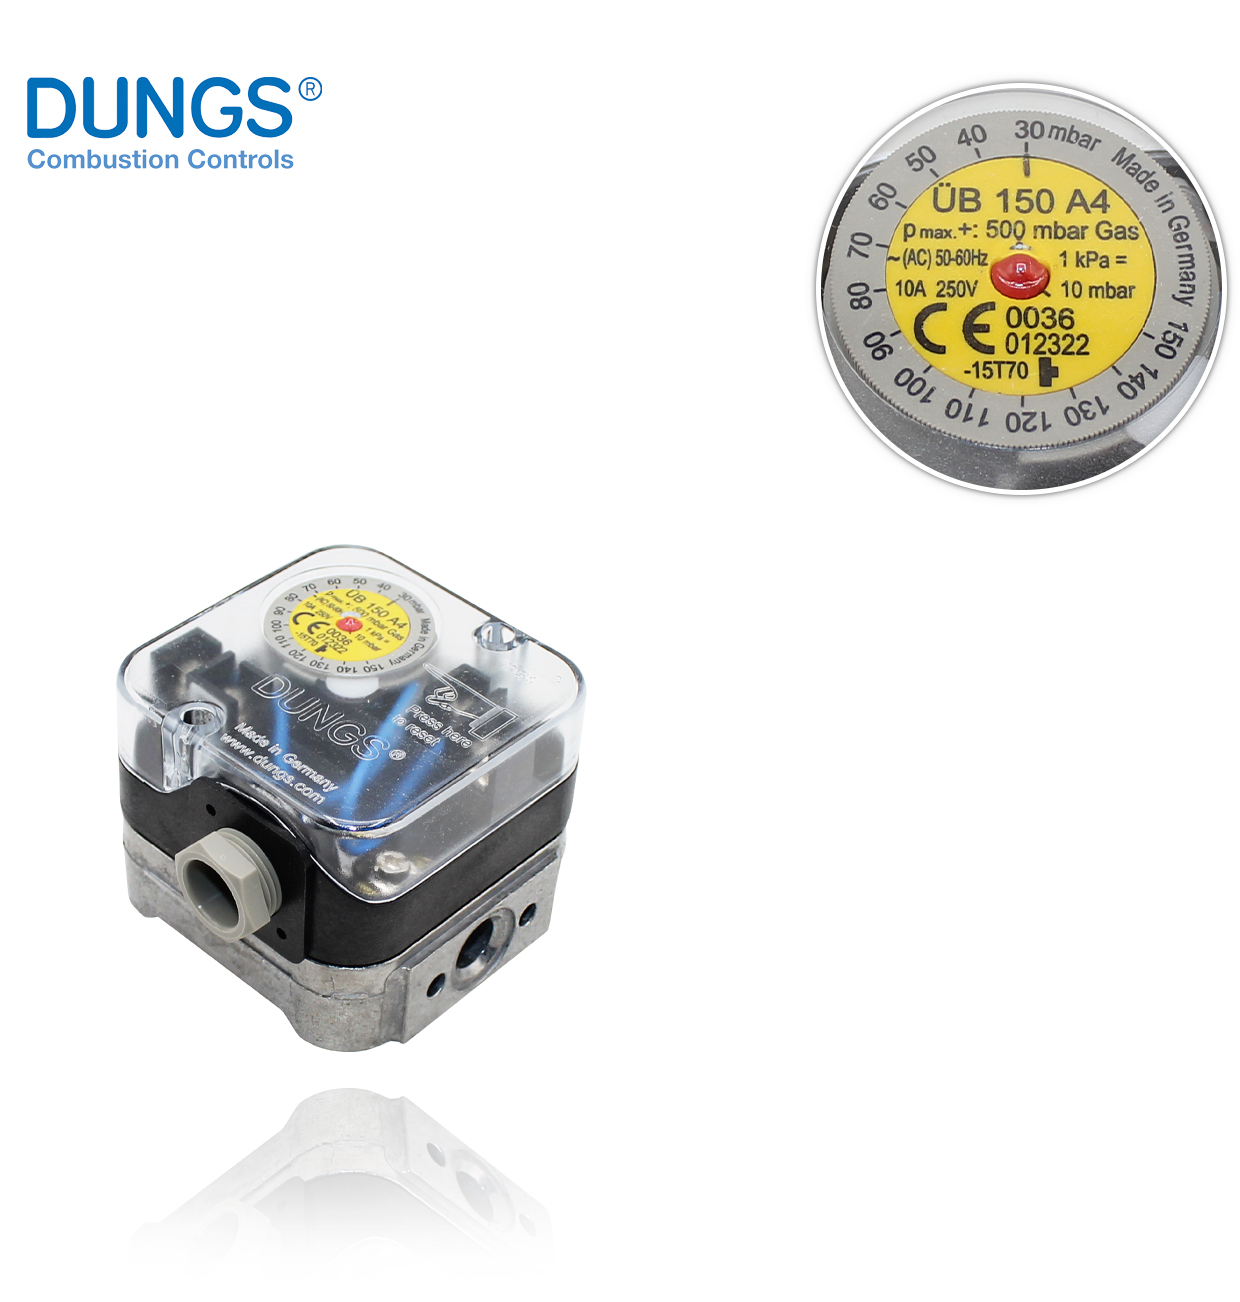 UB 150 A4 138630 DUNGS HIGH GAS PRESSURE SWITCH